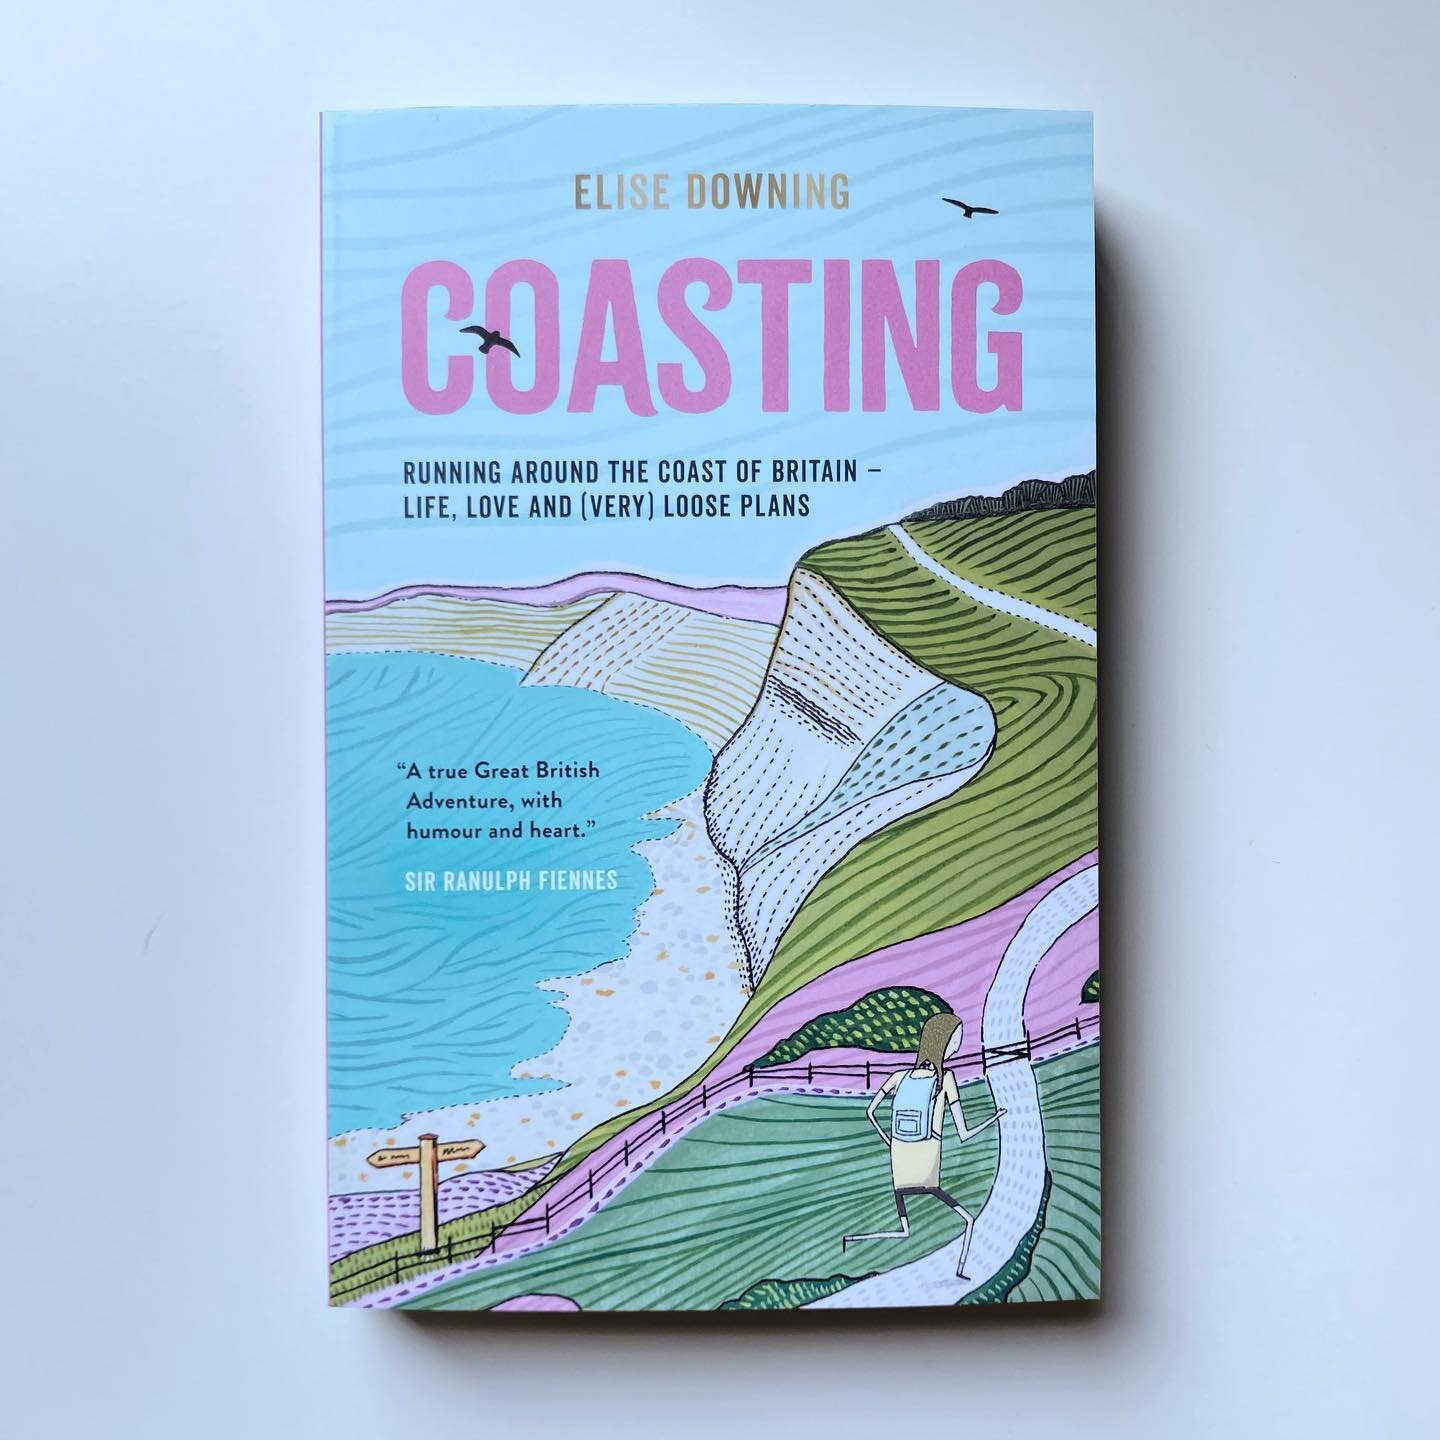 Treated myself to a new book, because I like running, I like Britain, and I like people who do crazy shit. Good on you @elisecdowning
#coasting